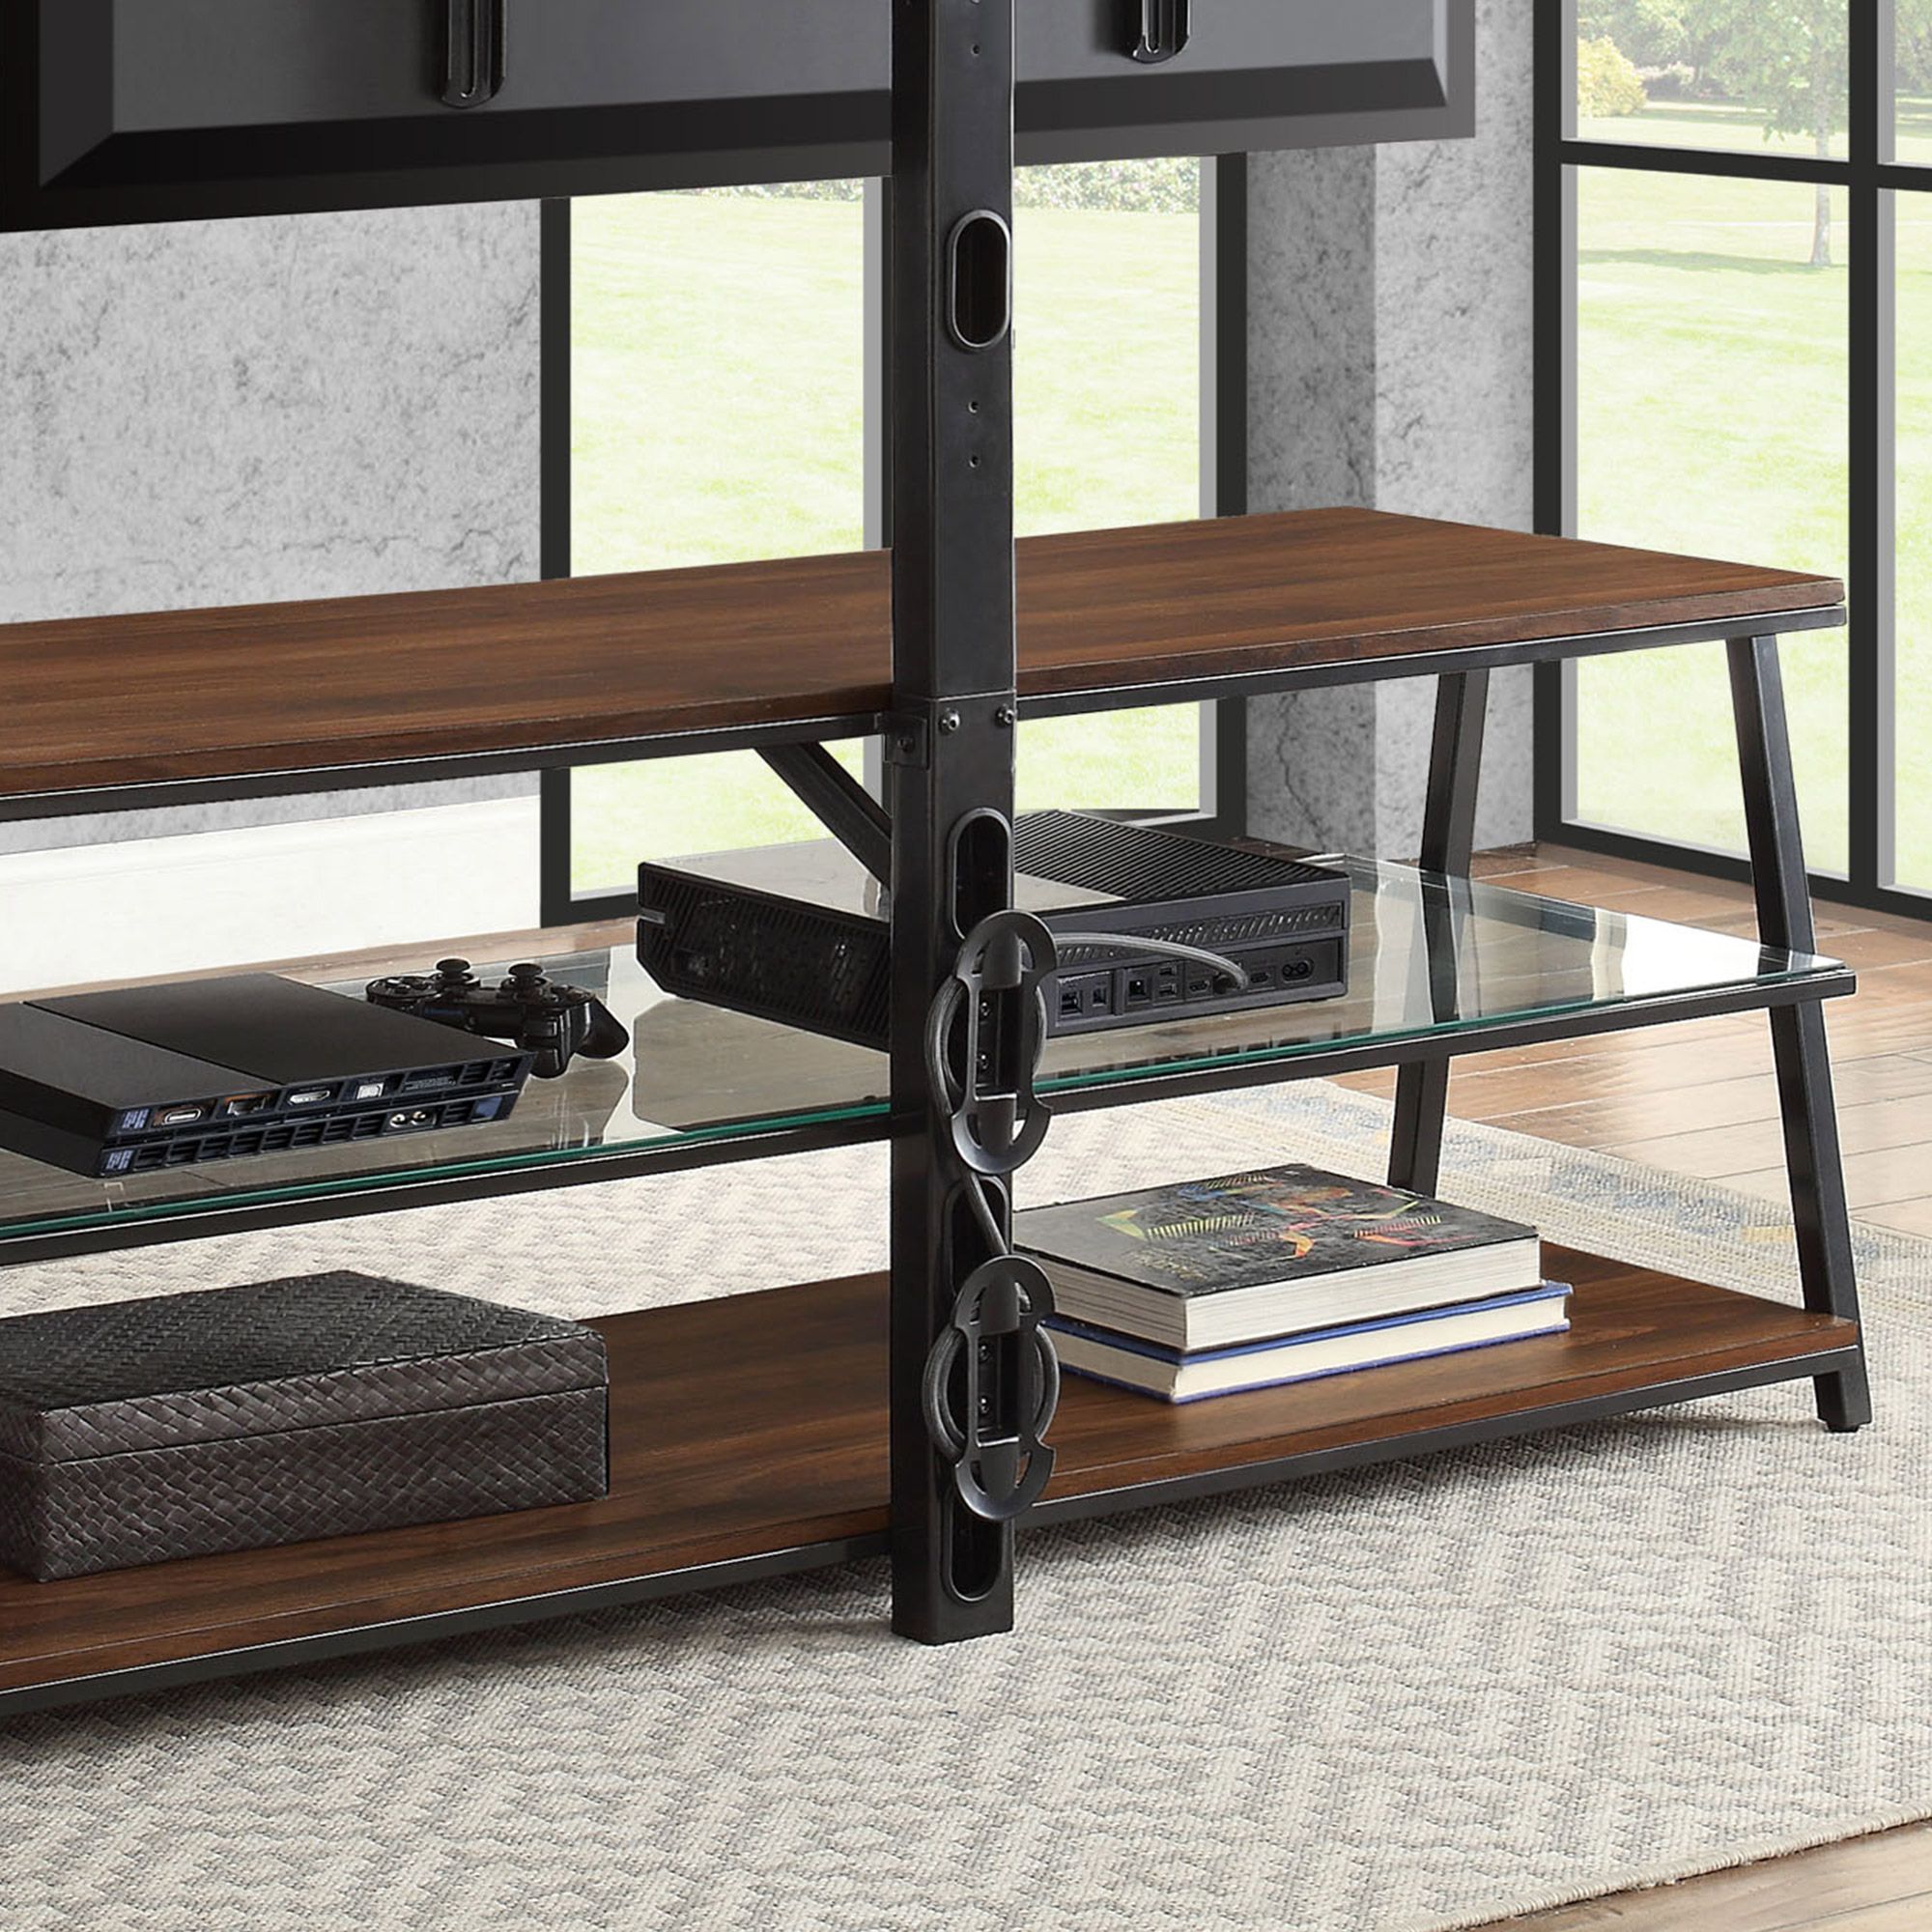 Mainstays Arris 3 In 1 Tv Stand For Televisions Up To 70 For Mainstays Arris 3 In 1 Tv Stands In Canyon Walnut Finish (Gallery 11 of 20)